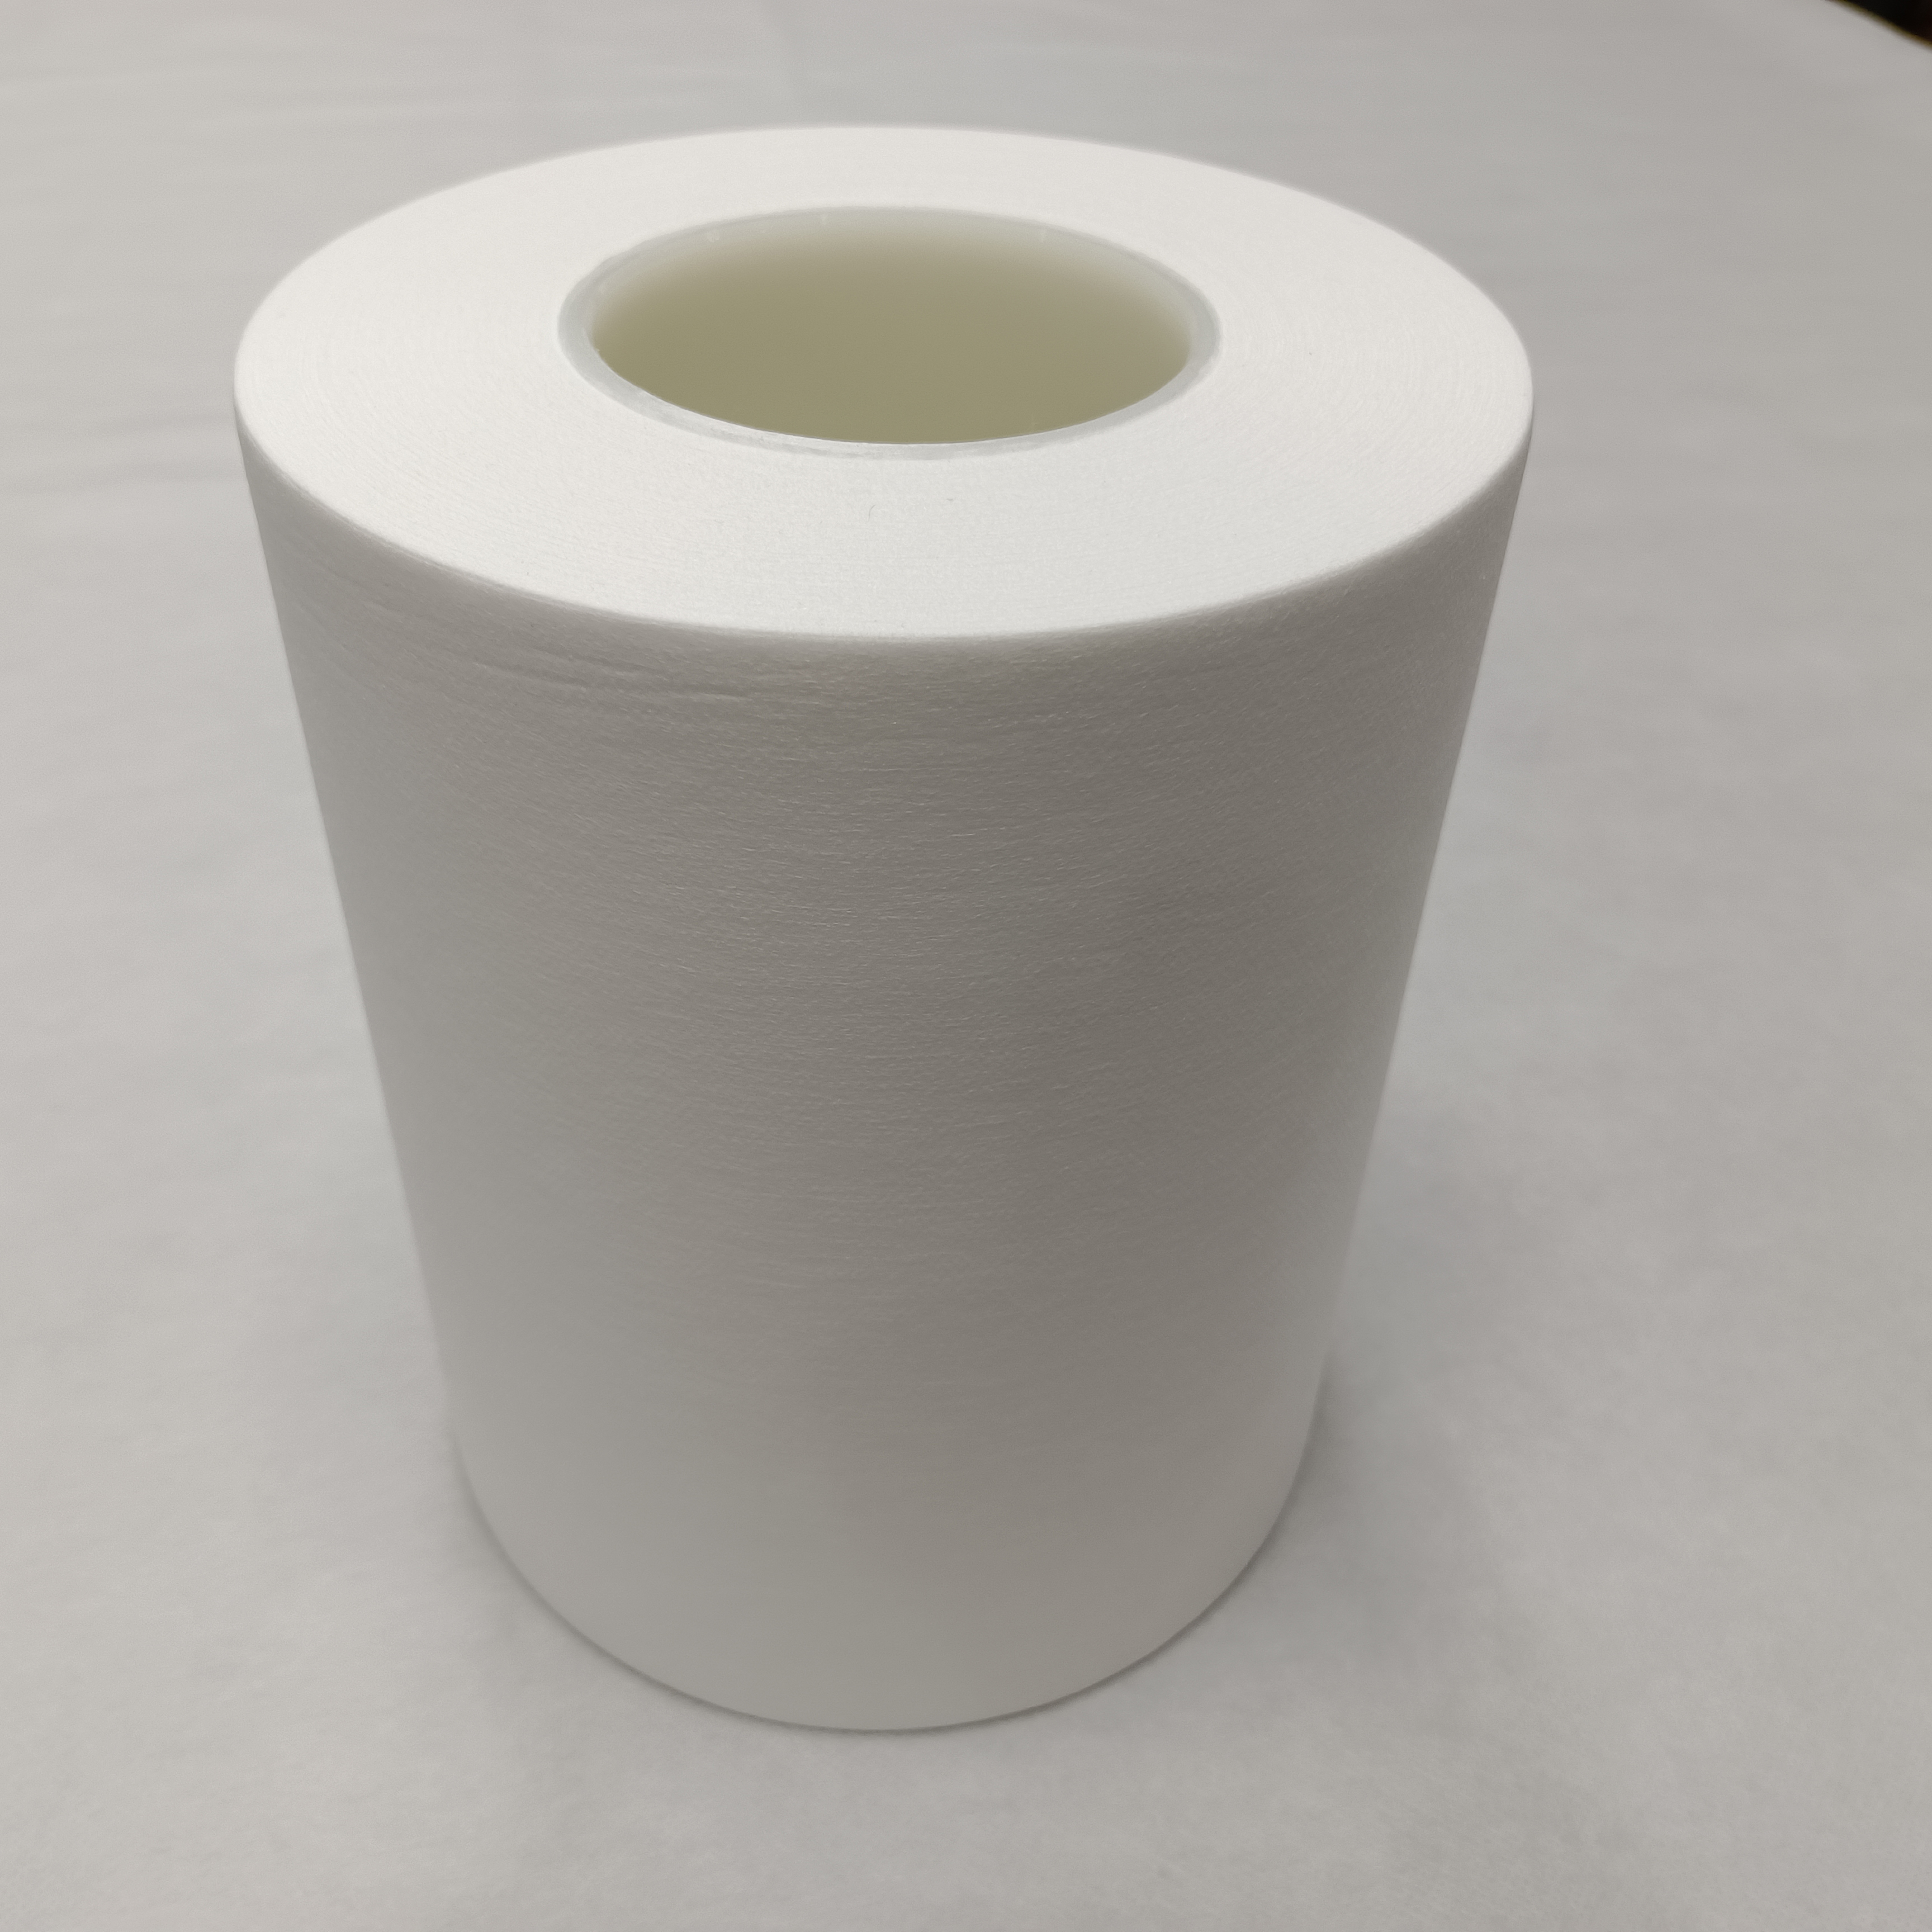 2022 China New Design Baby Textile - ES Nonwoven Laminated PE Film High Strength for Surface of Sanitary Napkins and diapers – Huabao